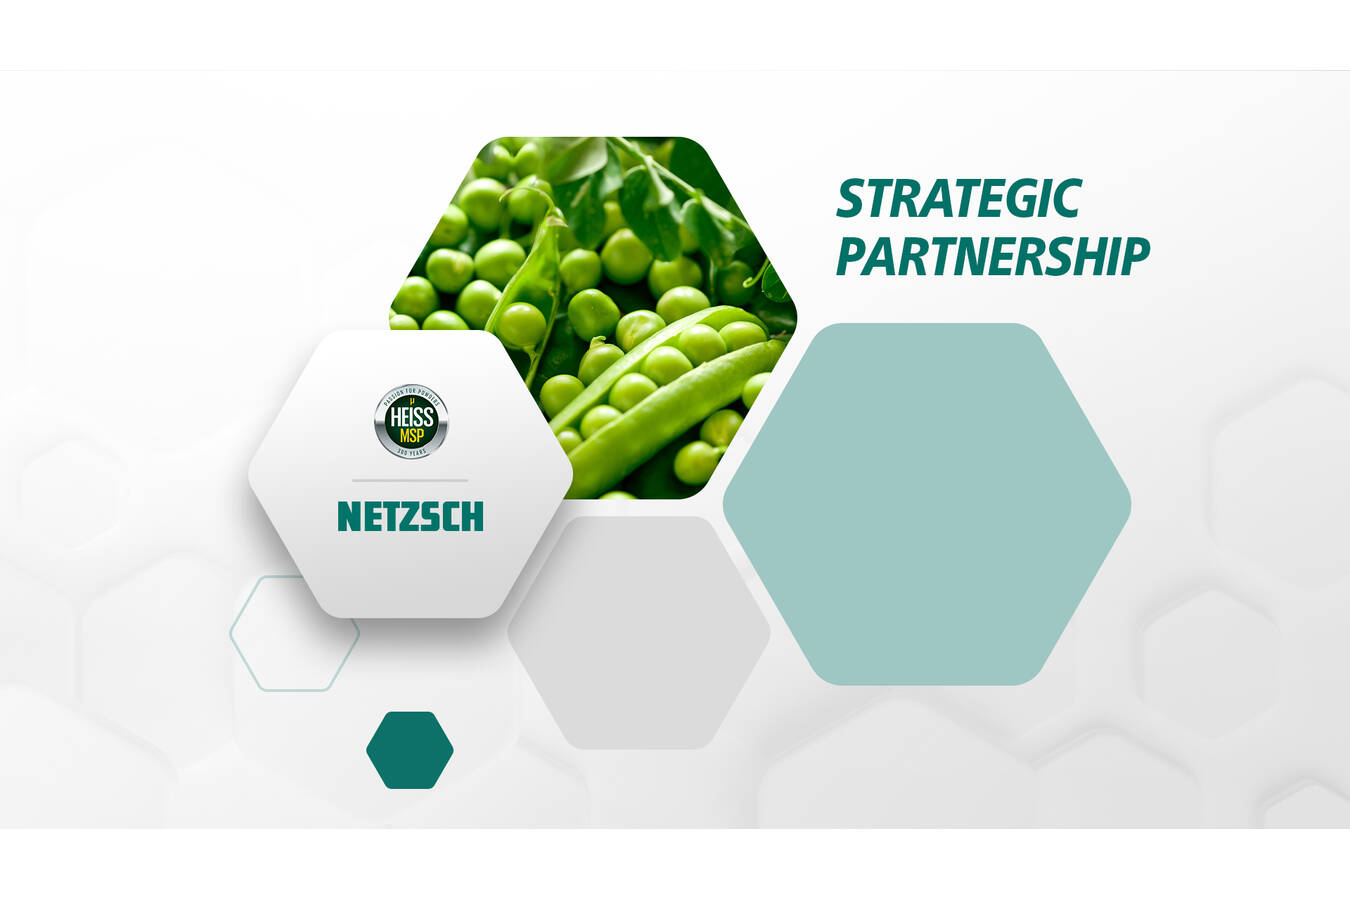 NETZSCH G&D and Heiss MSP sign cooperation agreement Cooperation for the production of sustainable protein concentrates from dry fractionation, meeting the highest standards in the food sector.